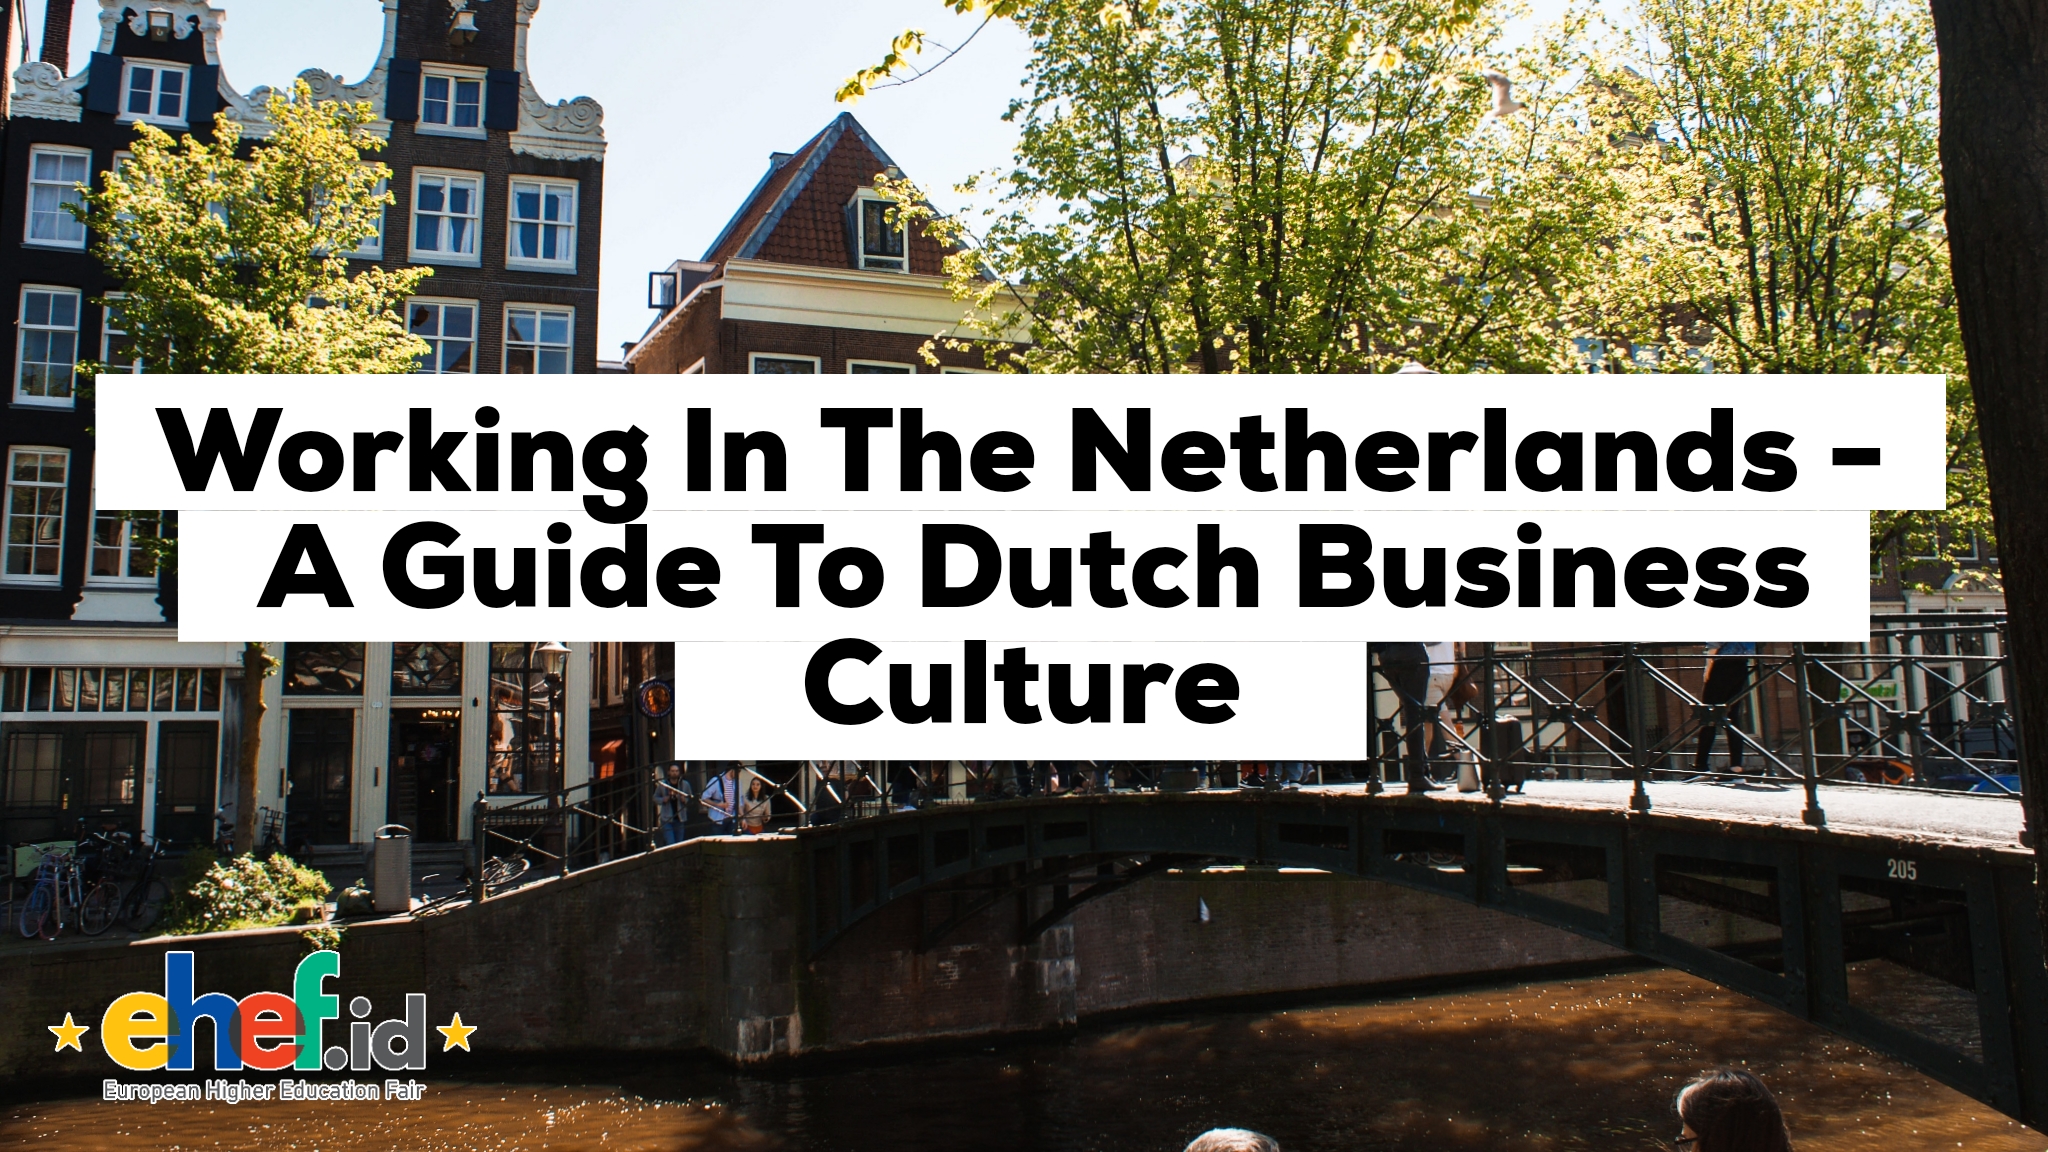 Working in the Netherlands - A Guide to Dutch Business Culture